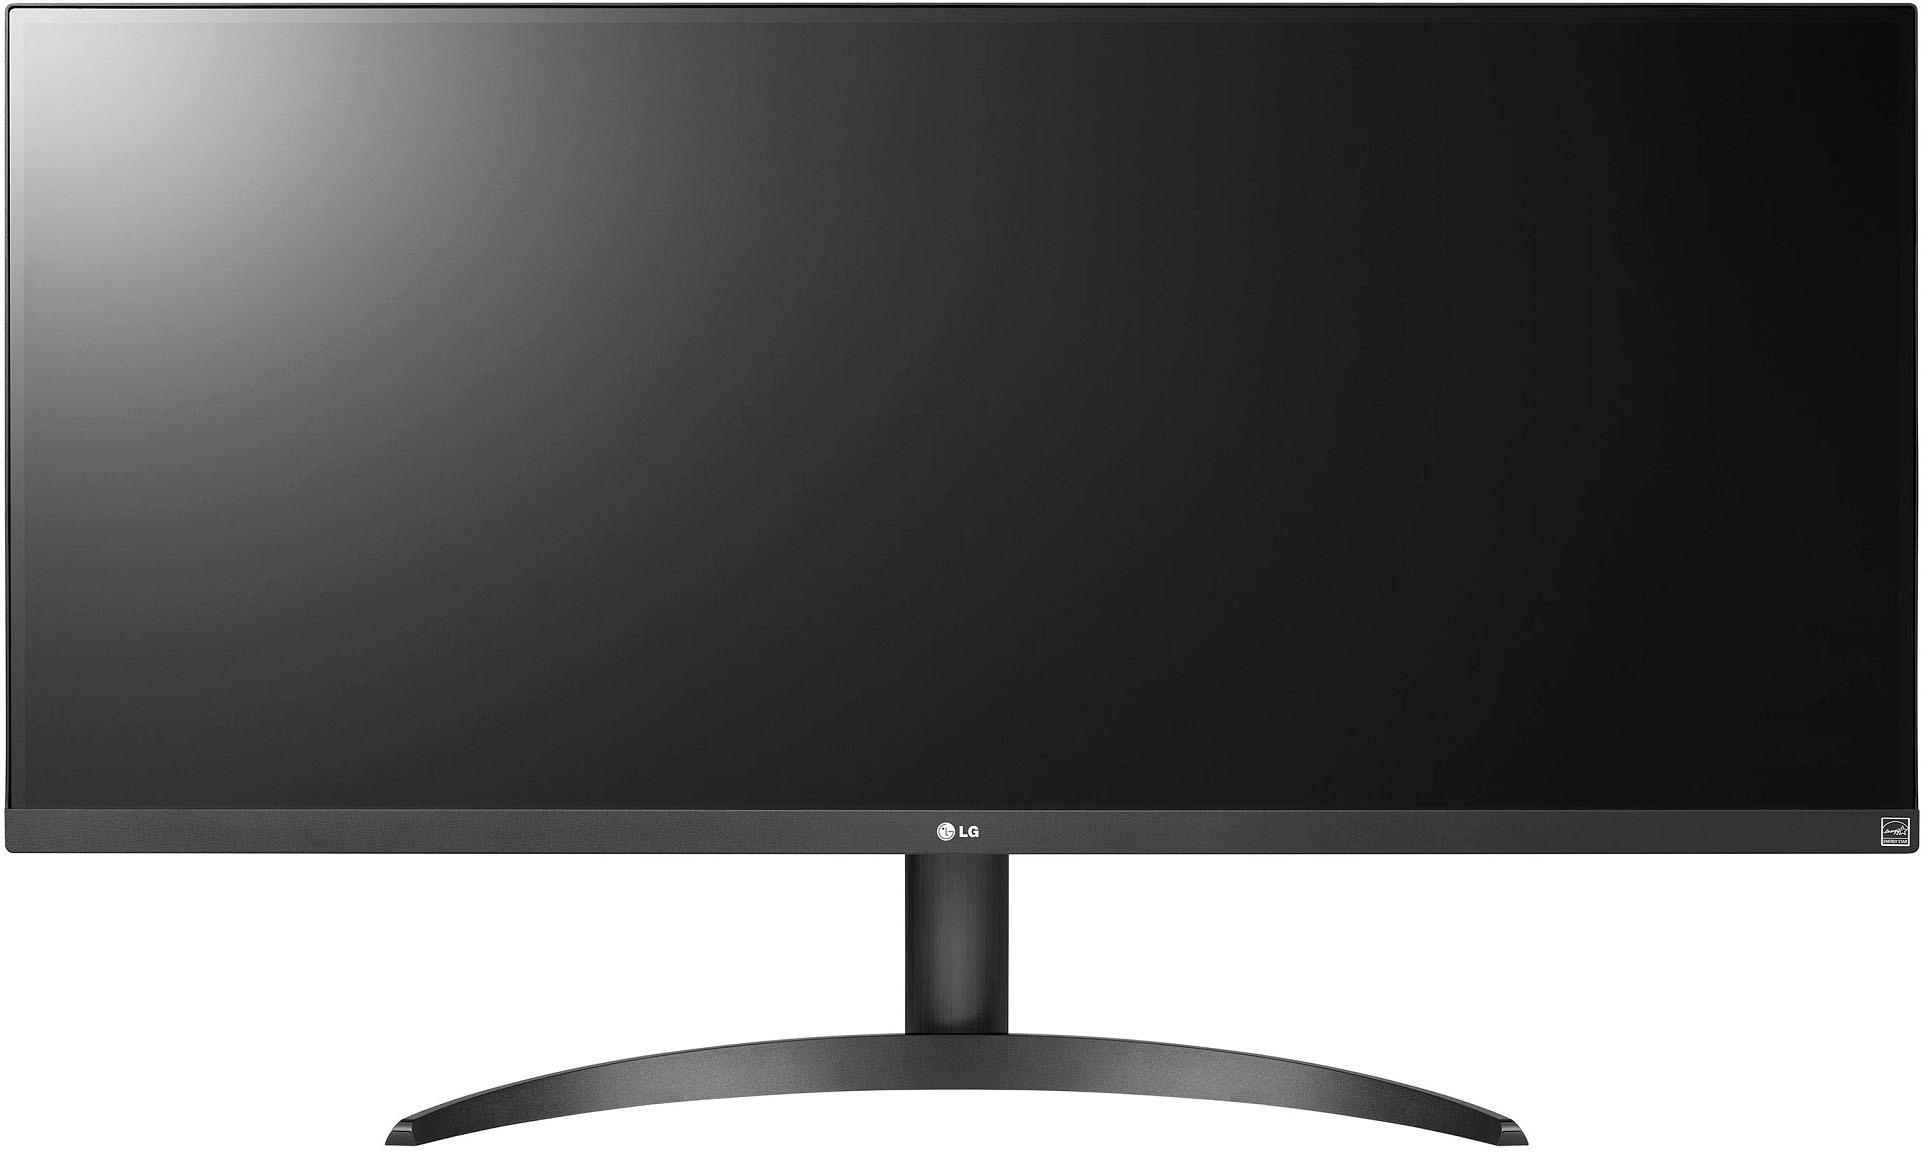 Angle View: LG - 34" IPS LED UltraWide FHD 100Hz AMD FreeSync Monitor with HDR (HDMI, DisplayPort) - Black